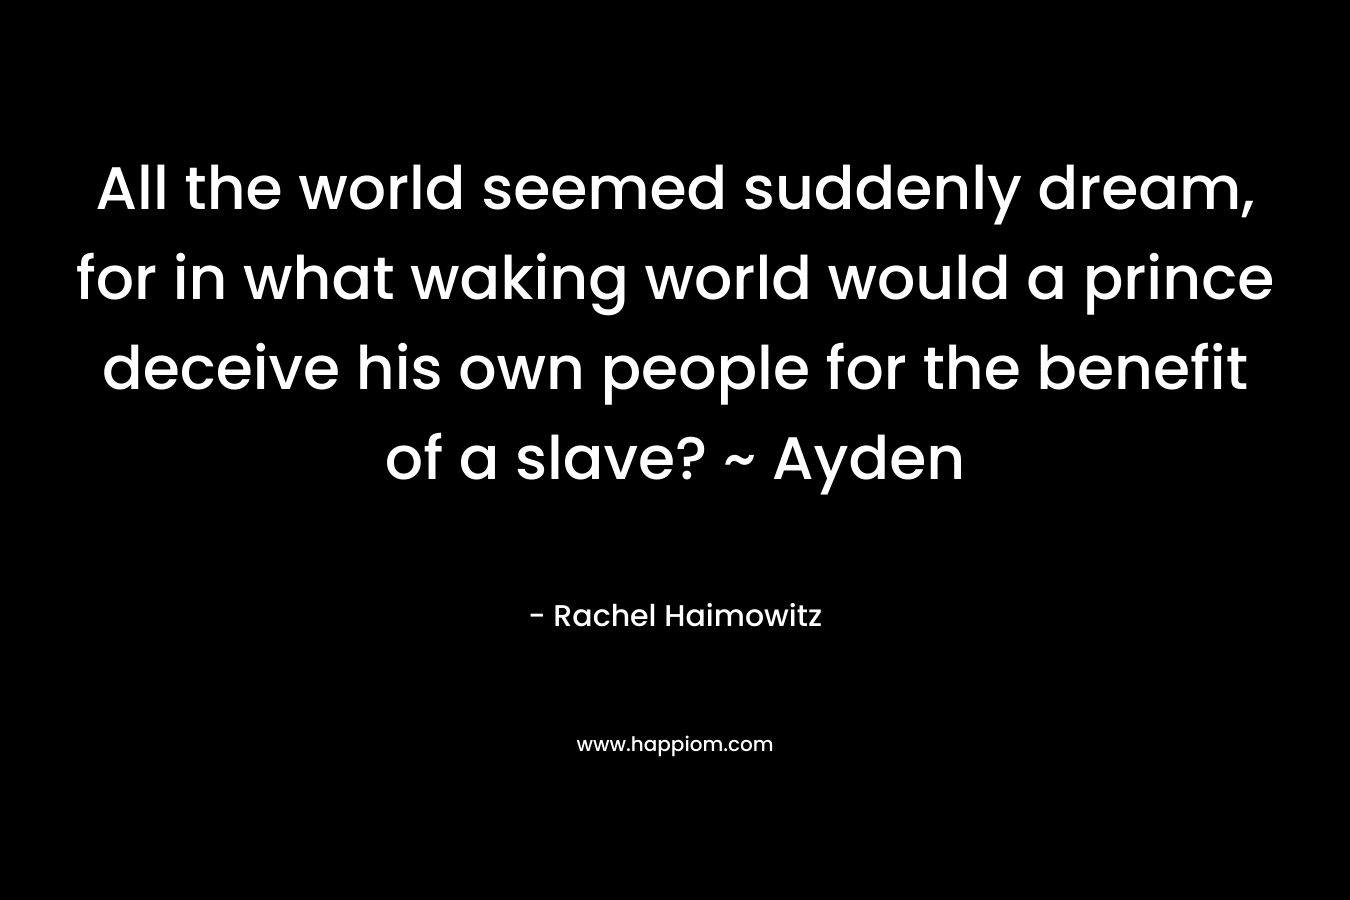 All the world seemed suddenly dream, for in what waking world would a prince deceive his own people for the benefit of a slave? ~ Ayden – Rachel Haimowitz